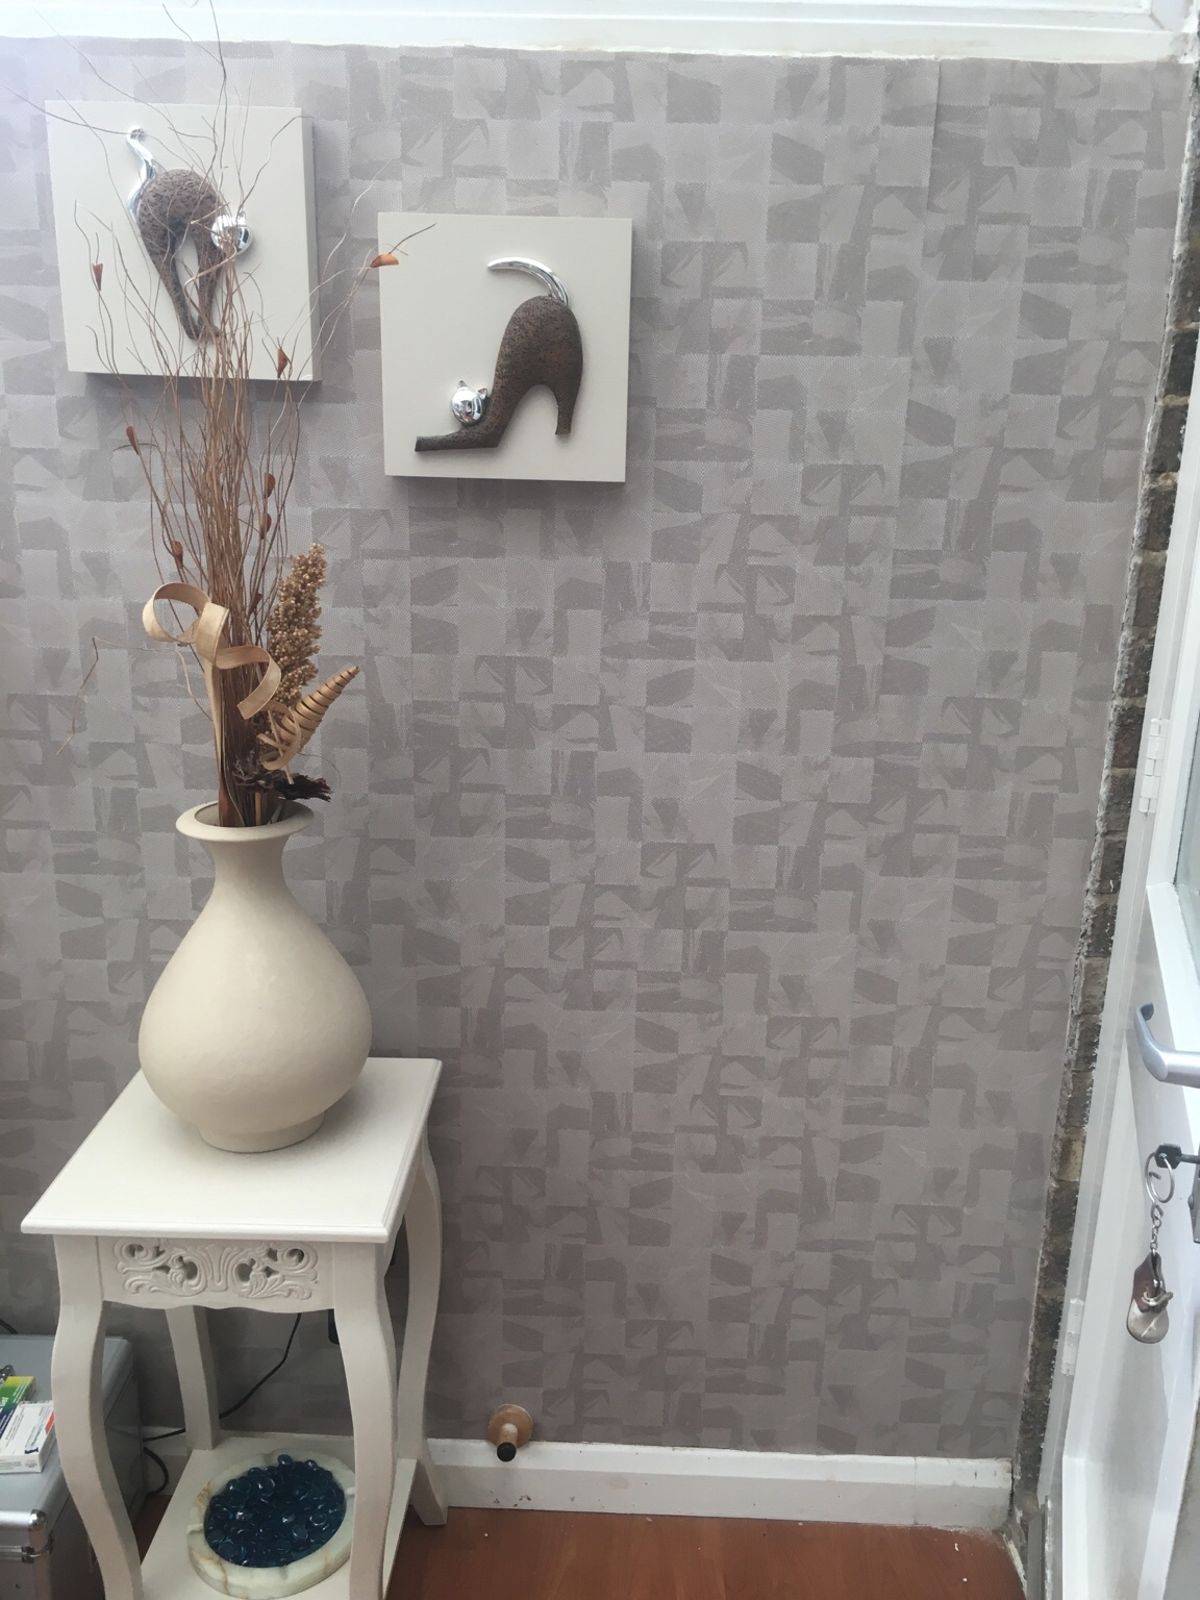 Colour Kelly’s Type/perfect Taupe
design Lizard Block
i - Room - HD Wallpaper 